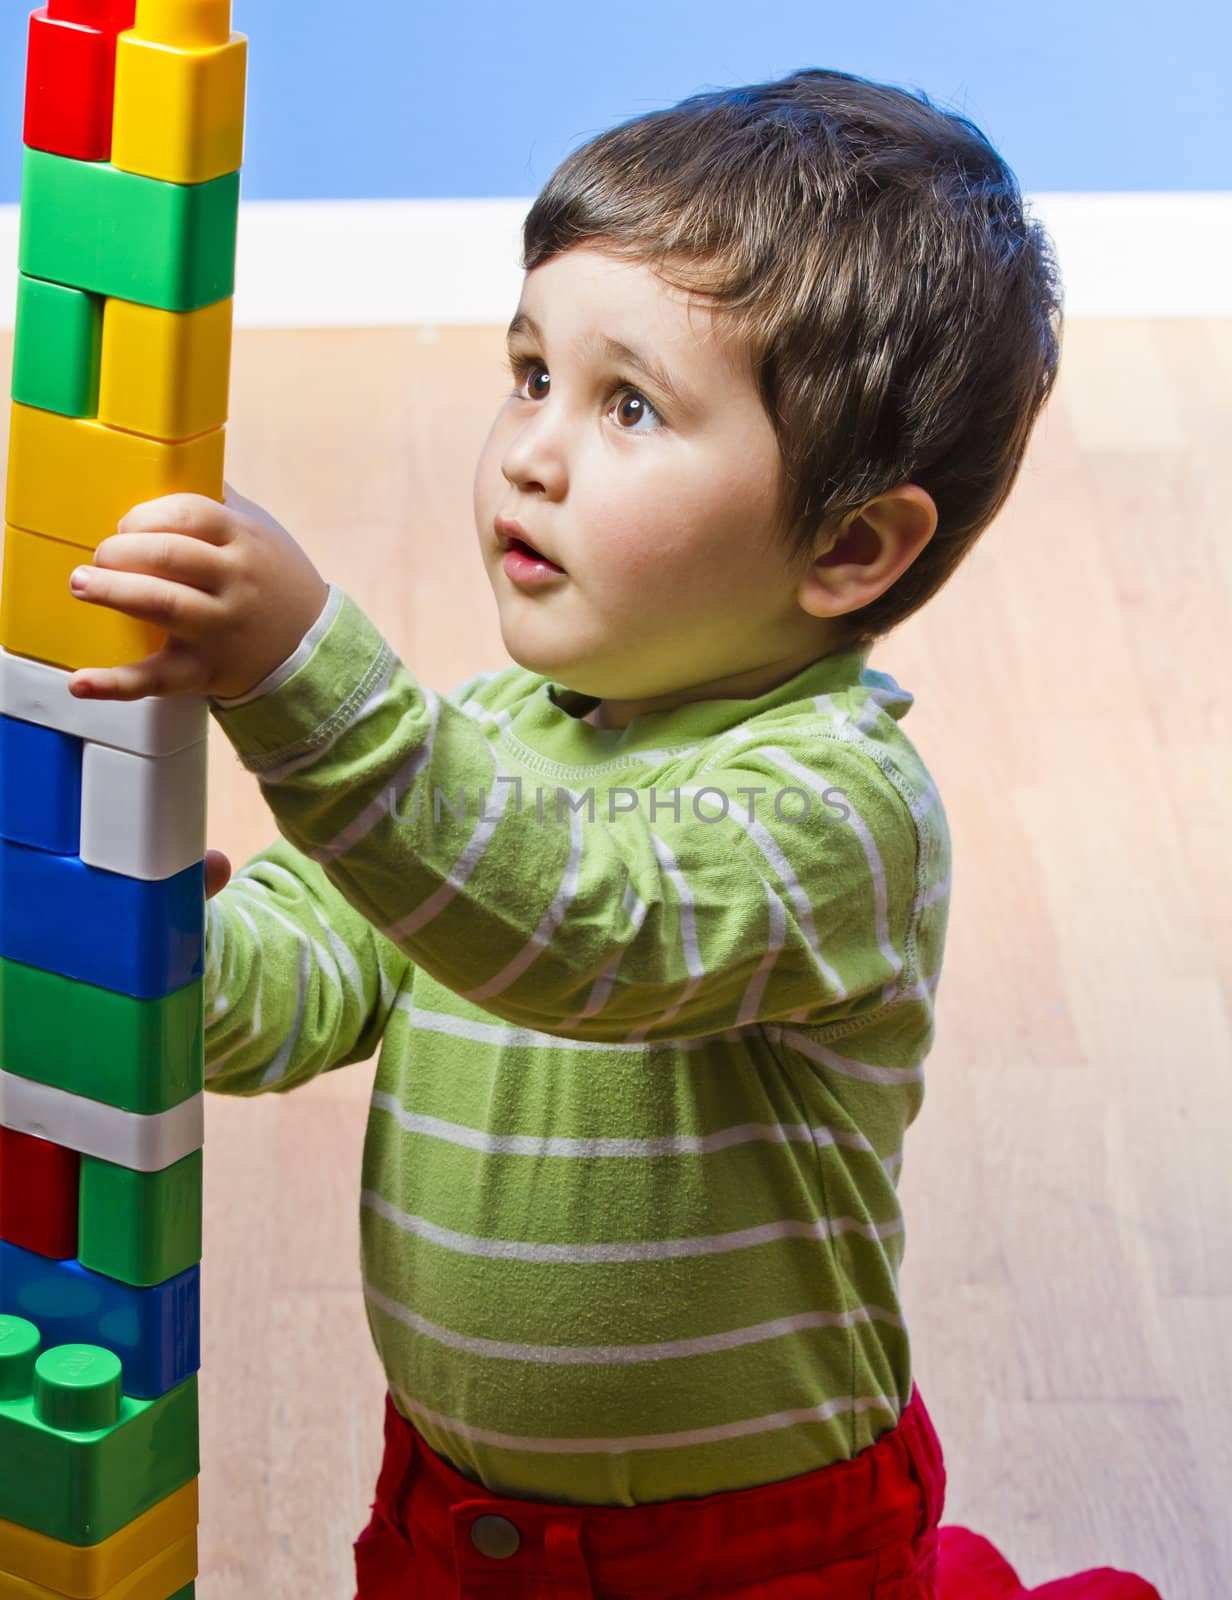 Cute little brunette baby playing with colorful blocks by FernandoCortes